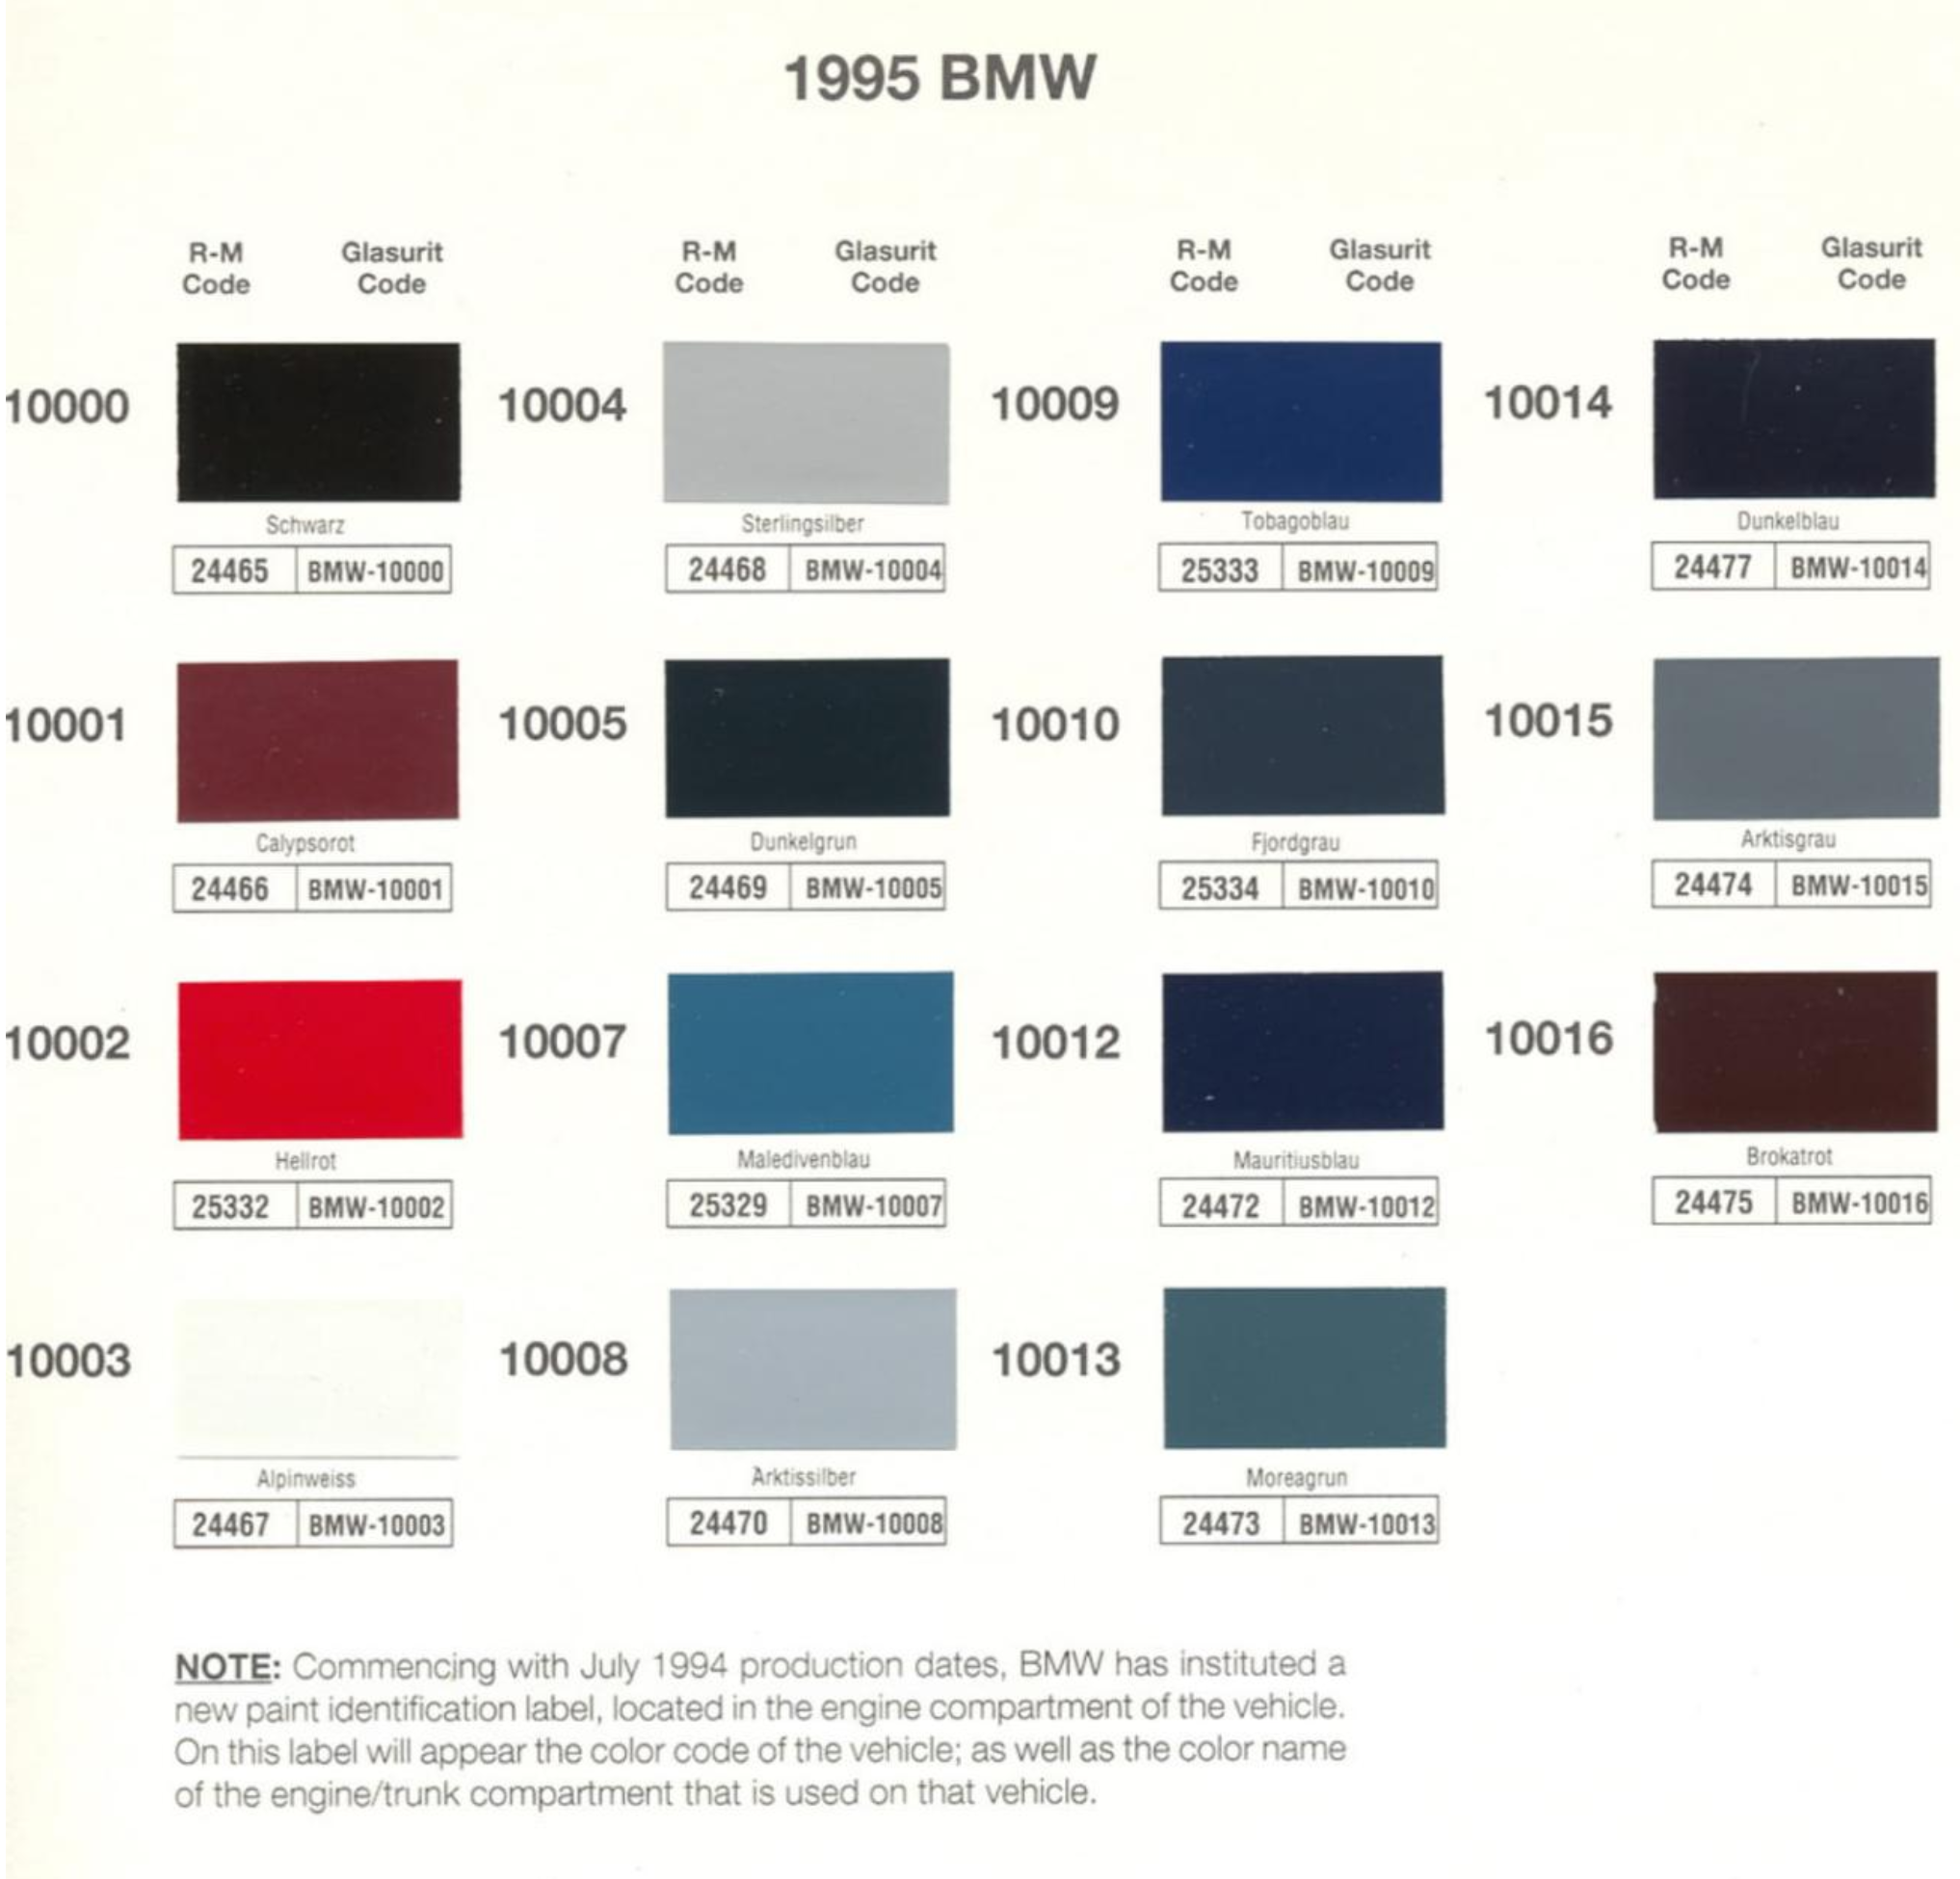 Paint Chips for Exterior, Interior, and Wheel Colors For BMW Colors 